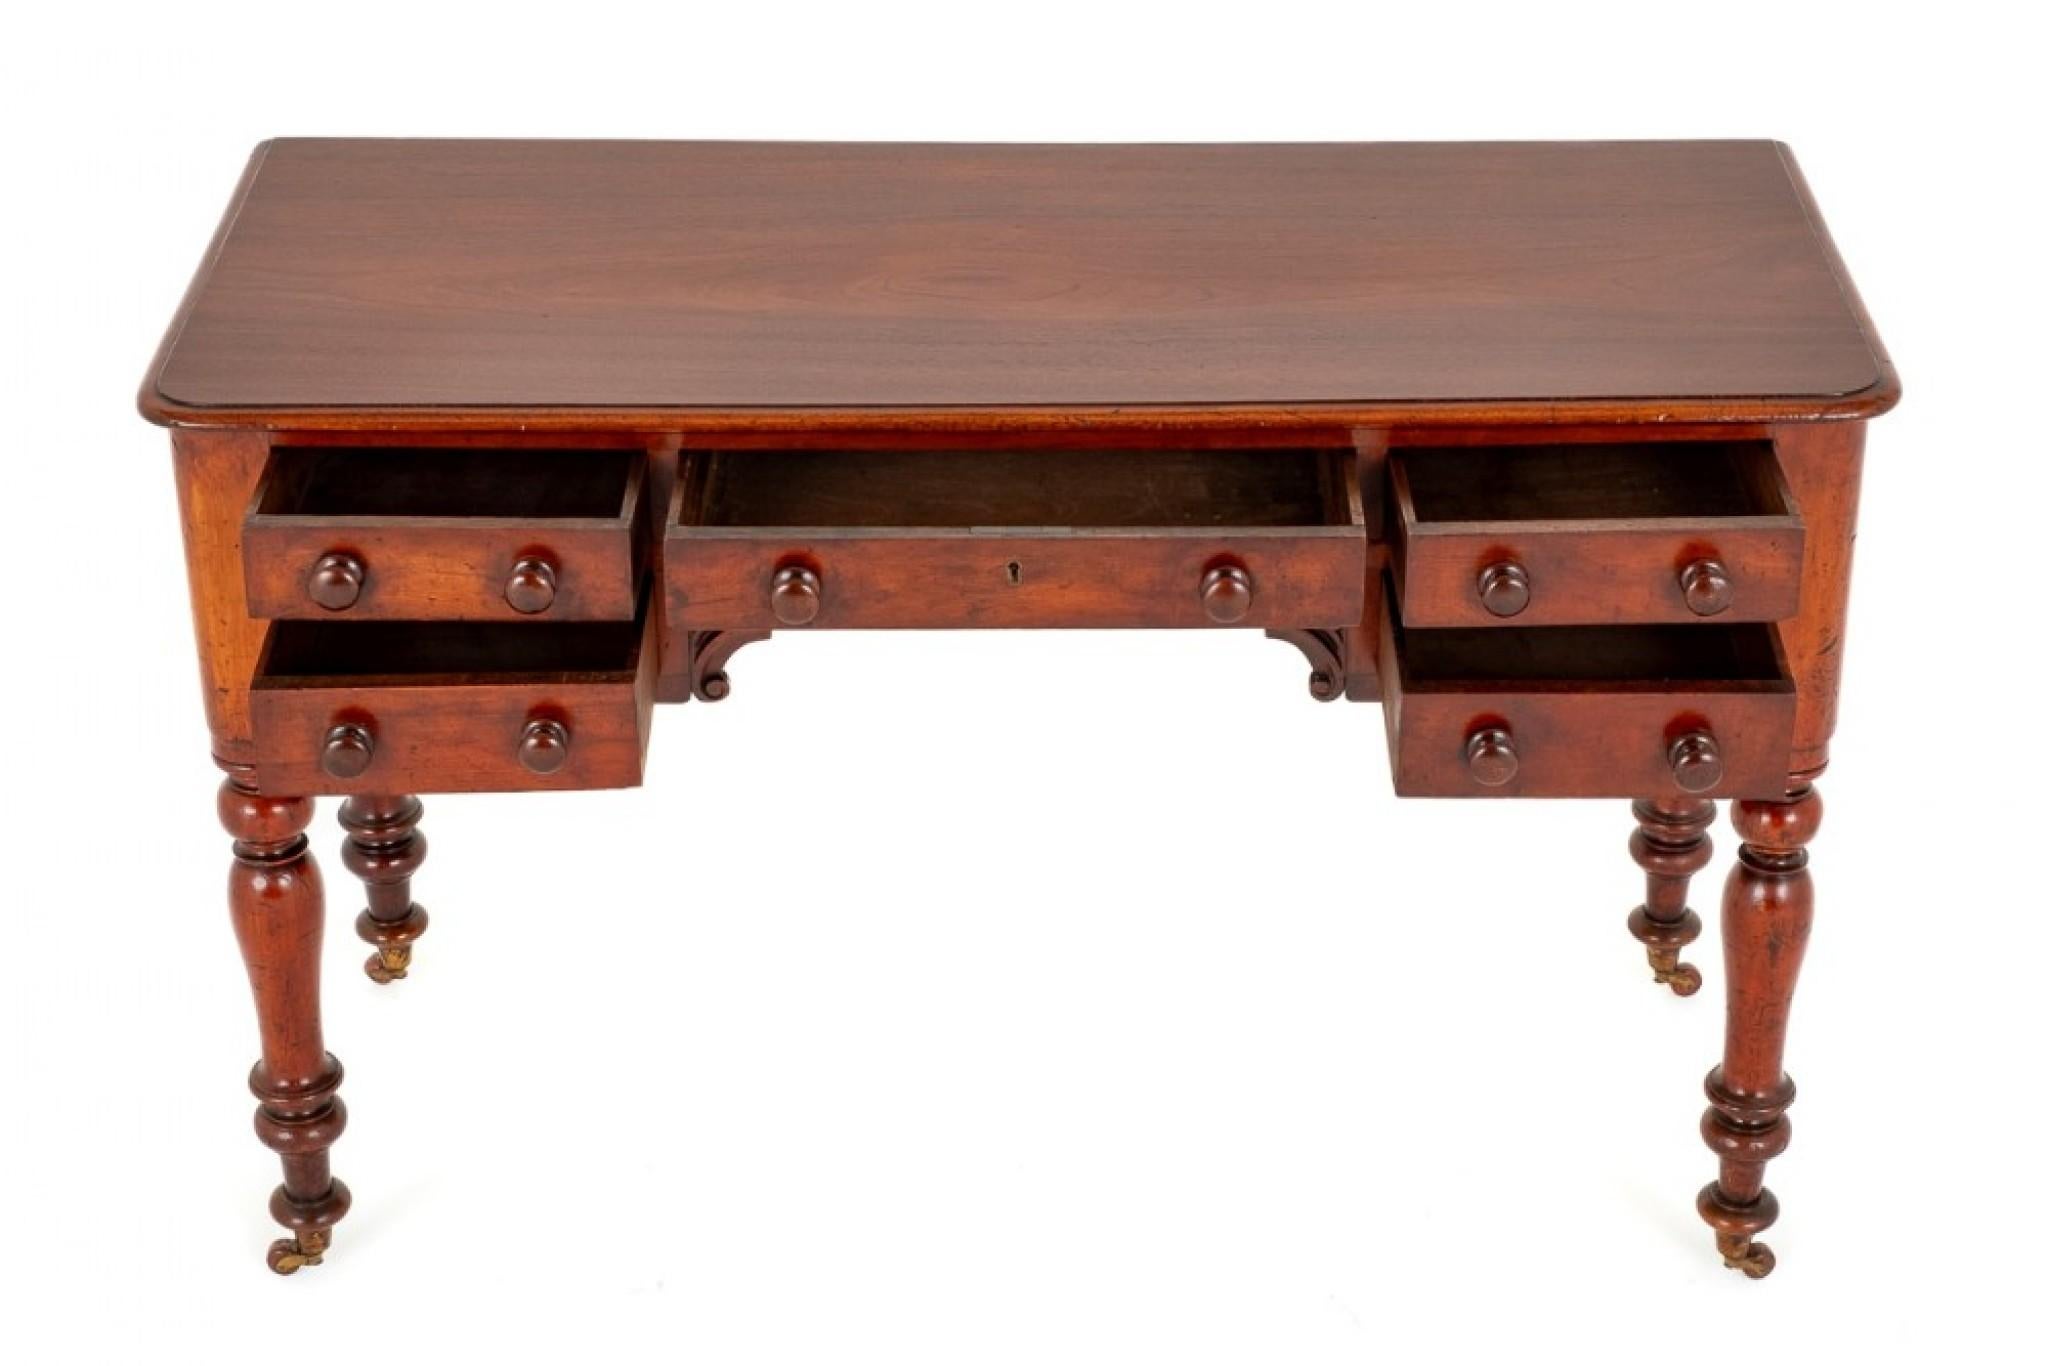 Antique Writing Table Victorian Mahogany Desk 1870 For Sale 2